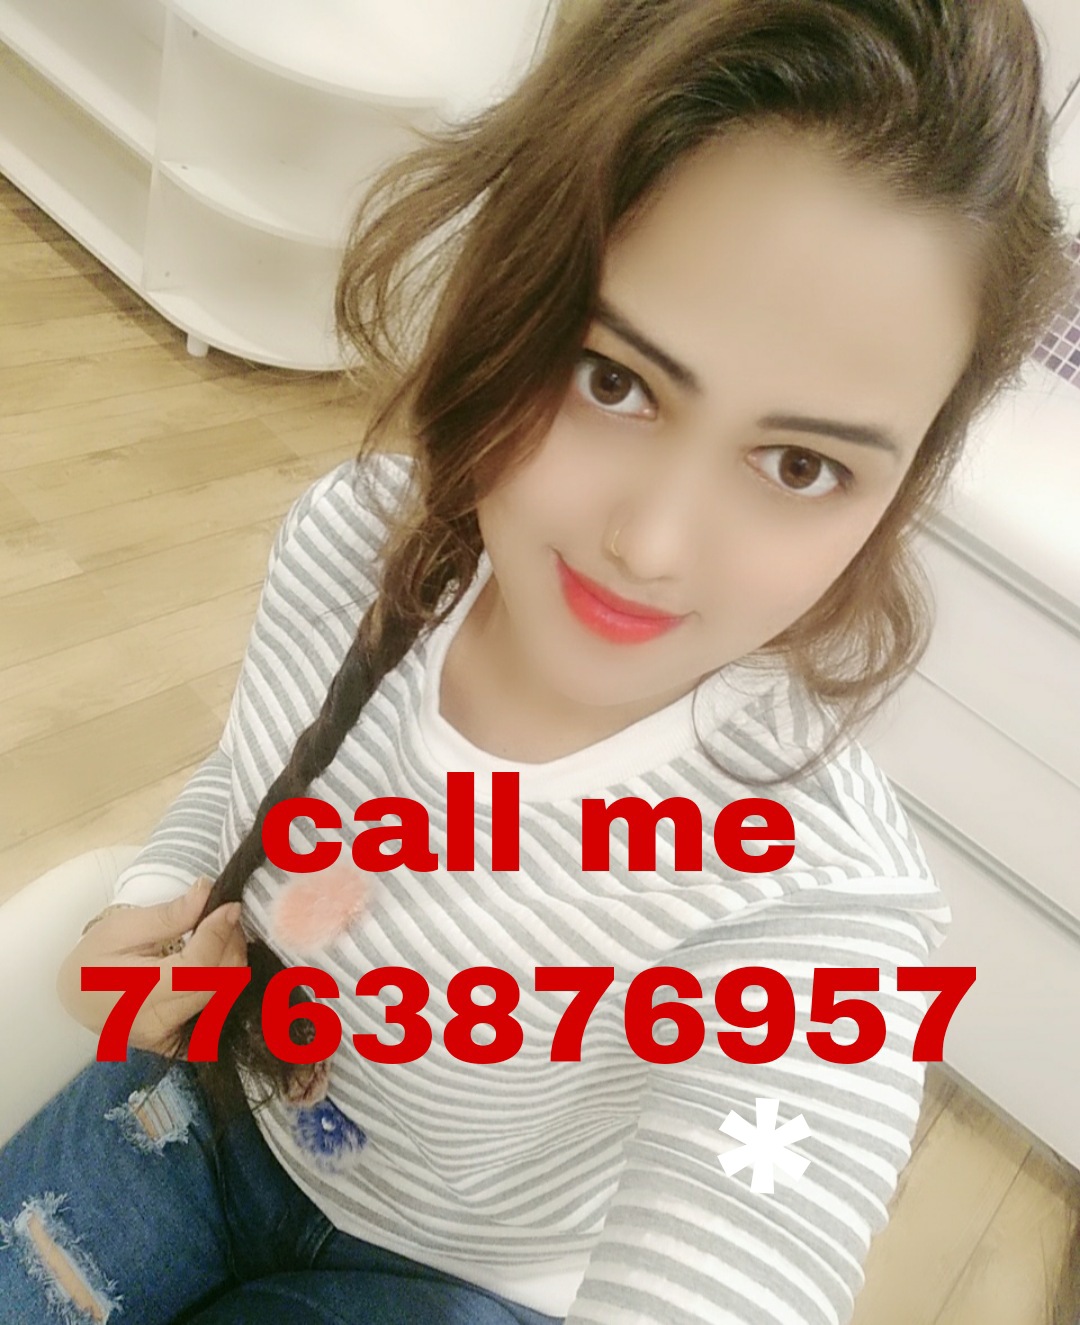 BATHINDA CALL GIRL LOW PRICE CASH PAYMENT SERVICE AVAILABLE 